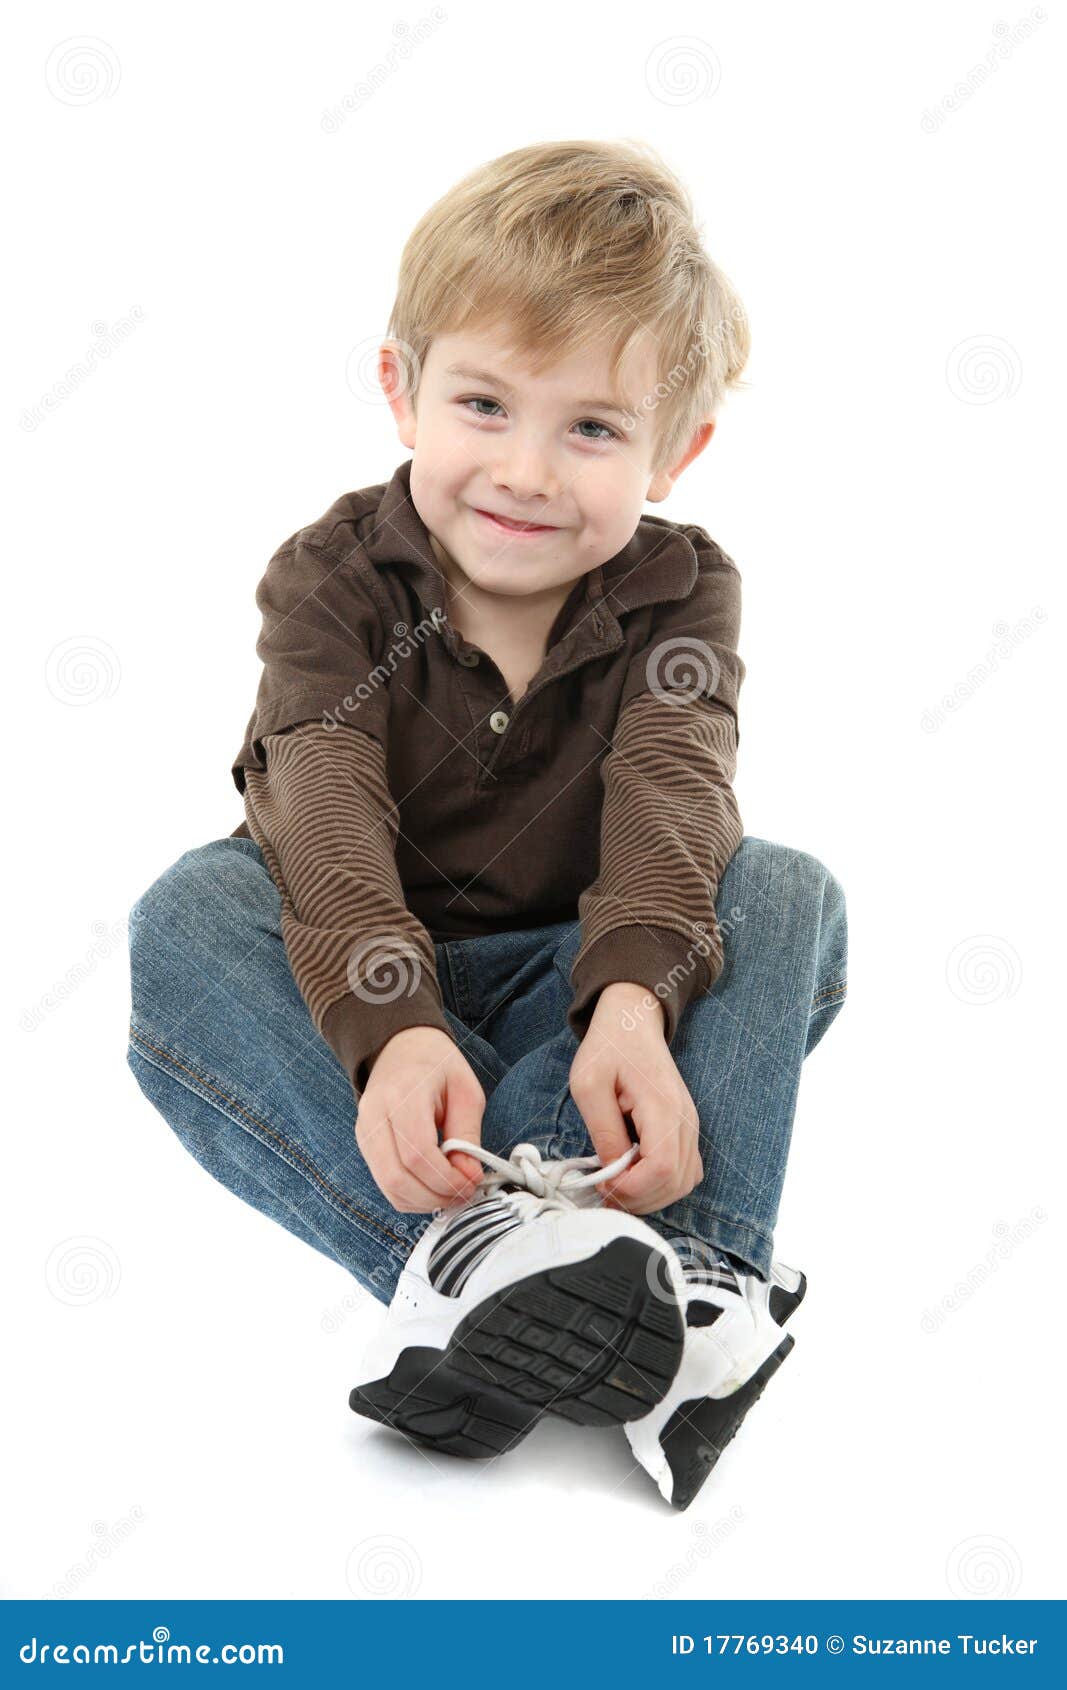 Boy tying his shoes stock photo. Image of learning, practice - 17769340